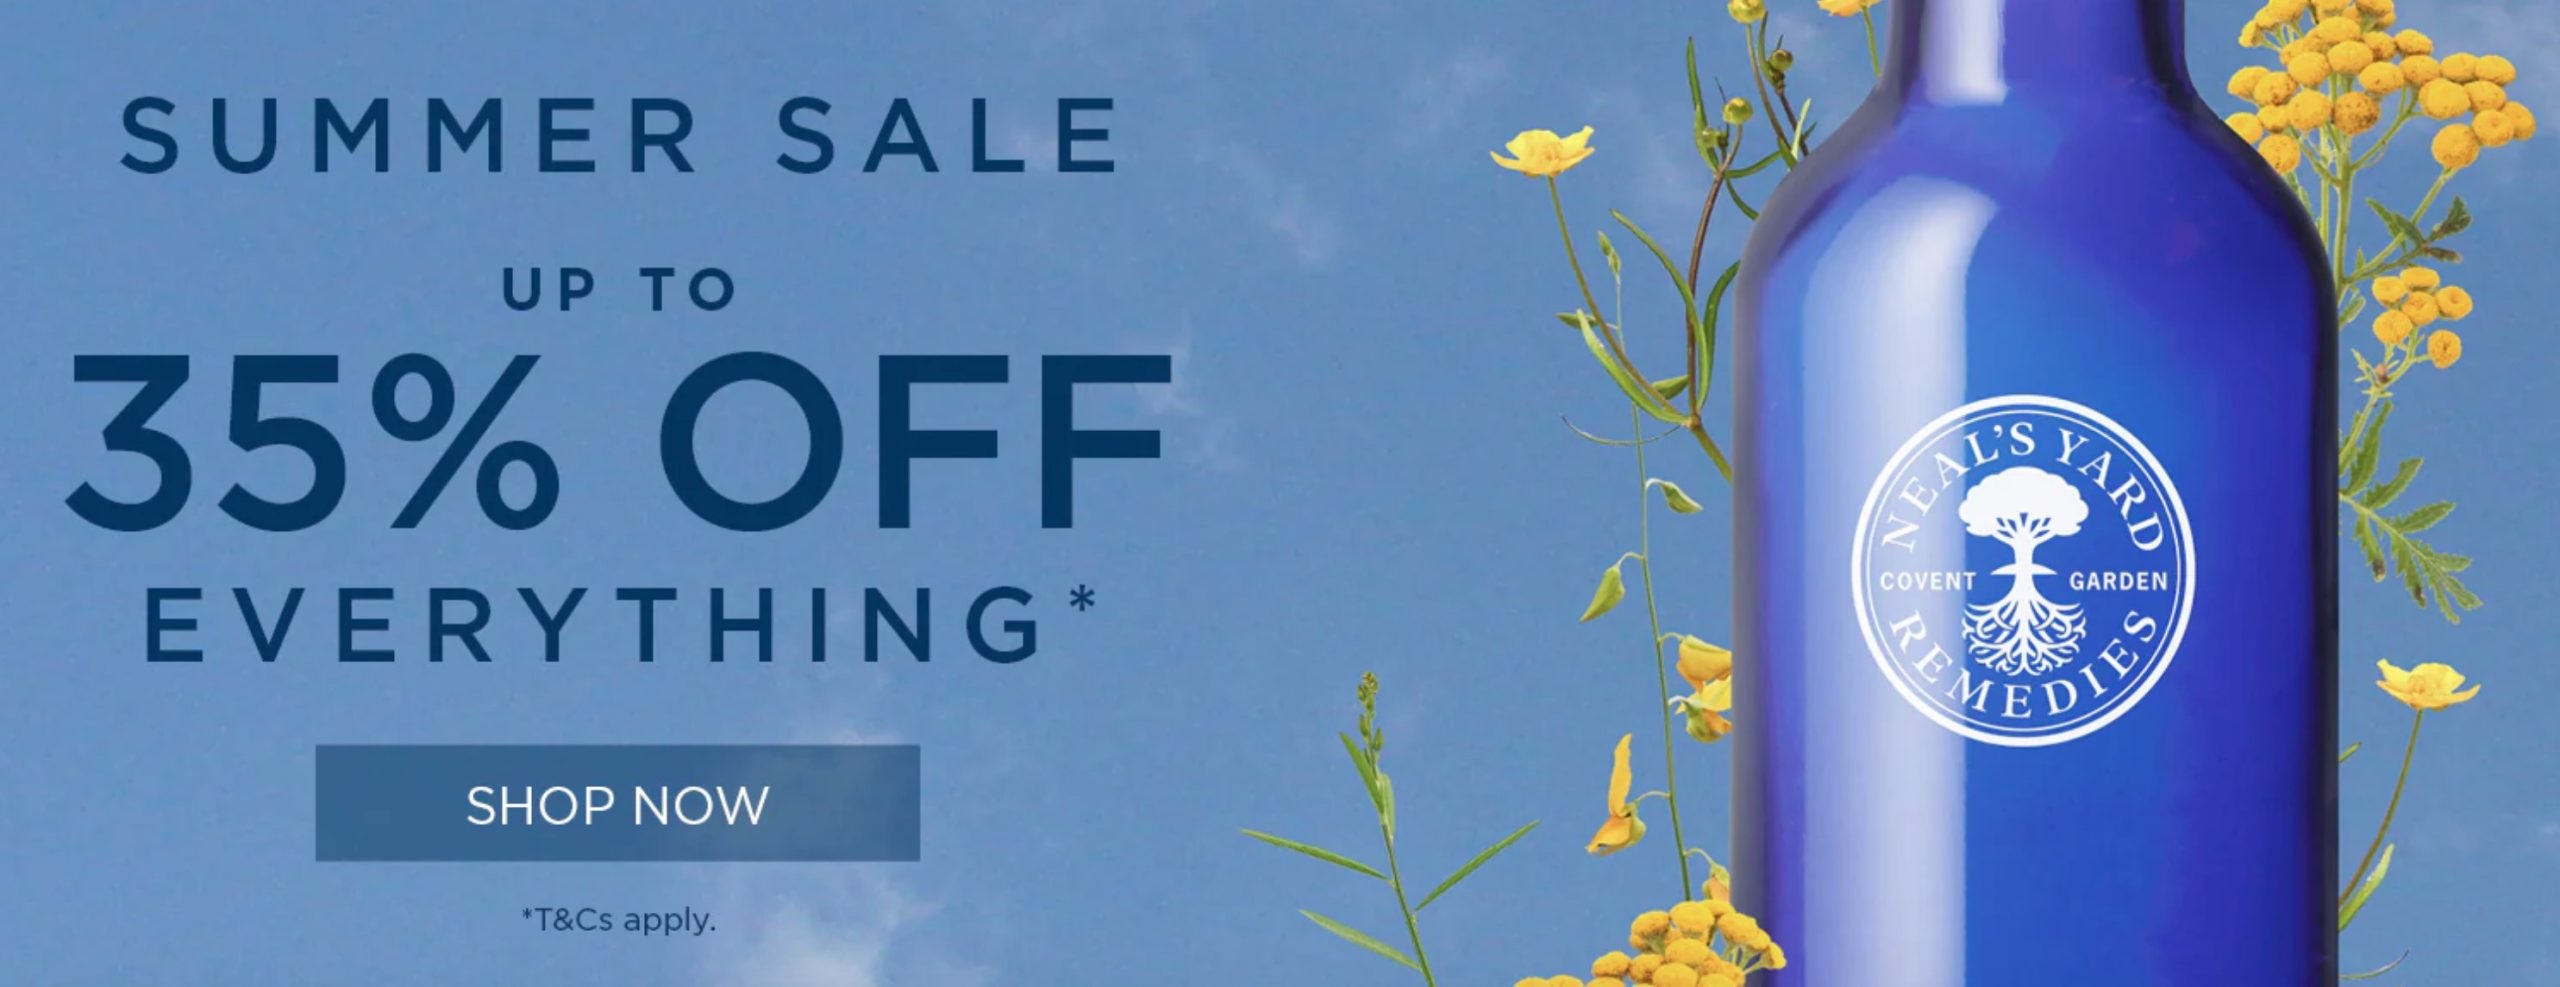 Up to 30% off summer sale at Neal's Yard Remedies